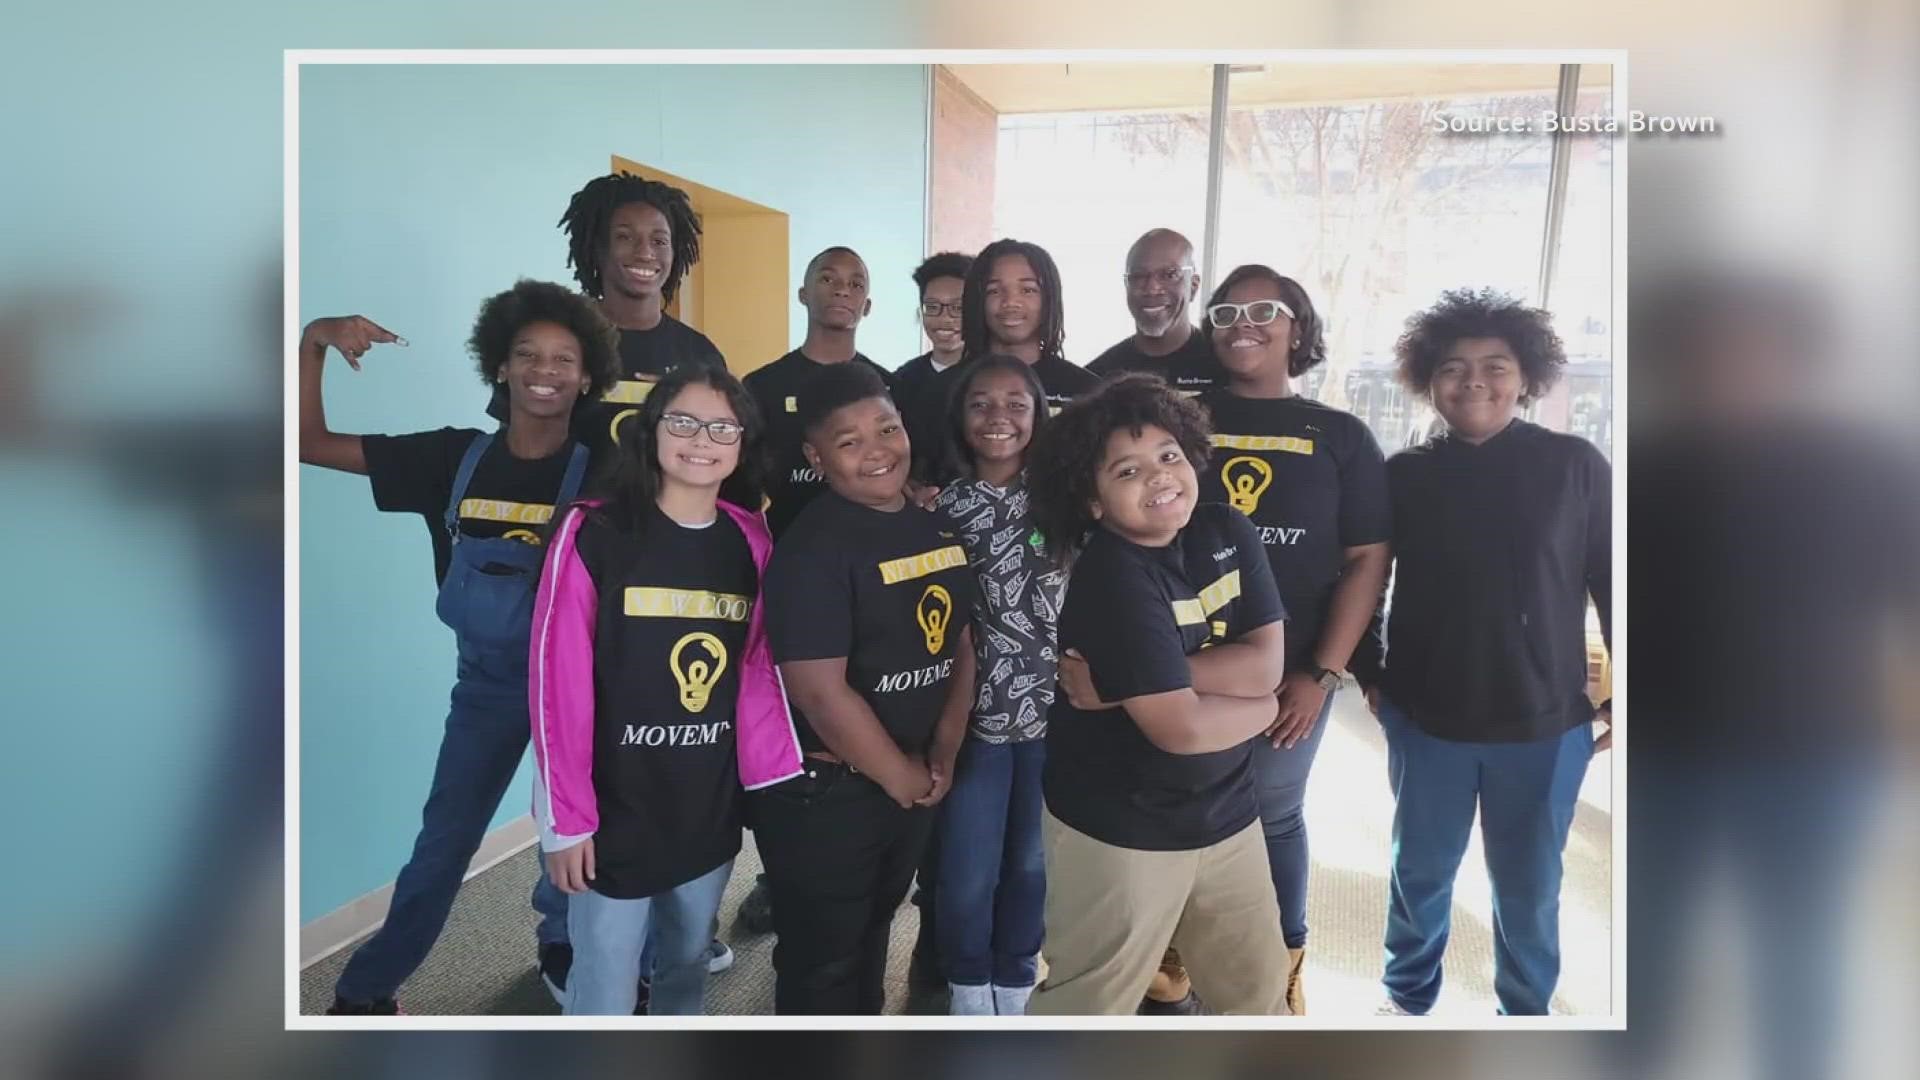 The New Cool Movement keeps North Carolina youth away from crime and focused on their futures.